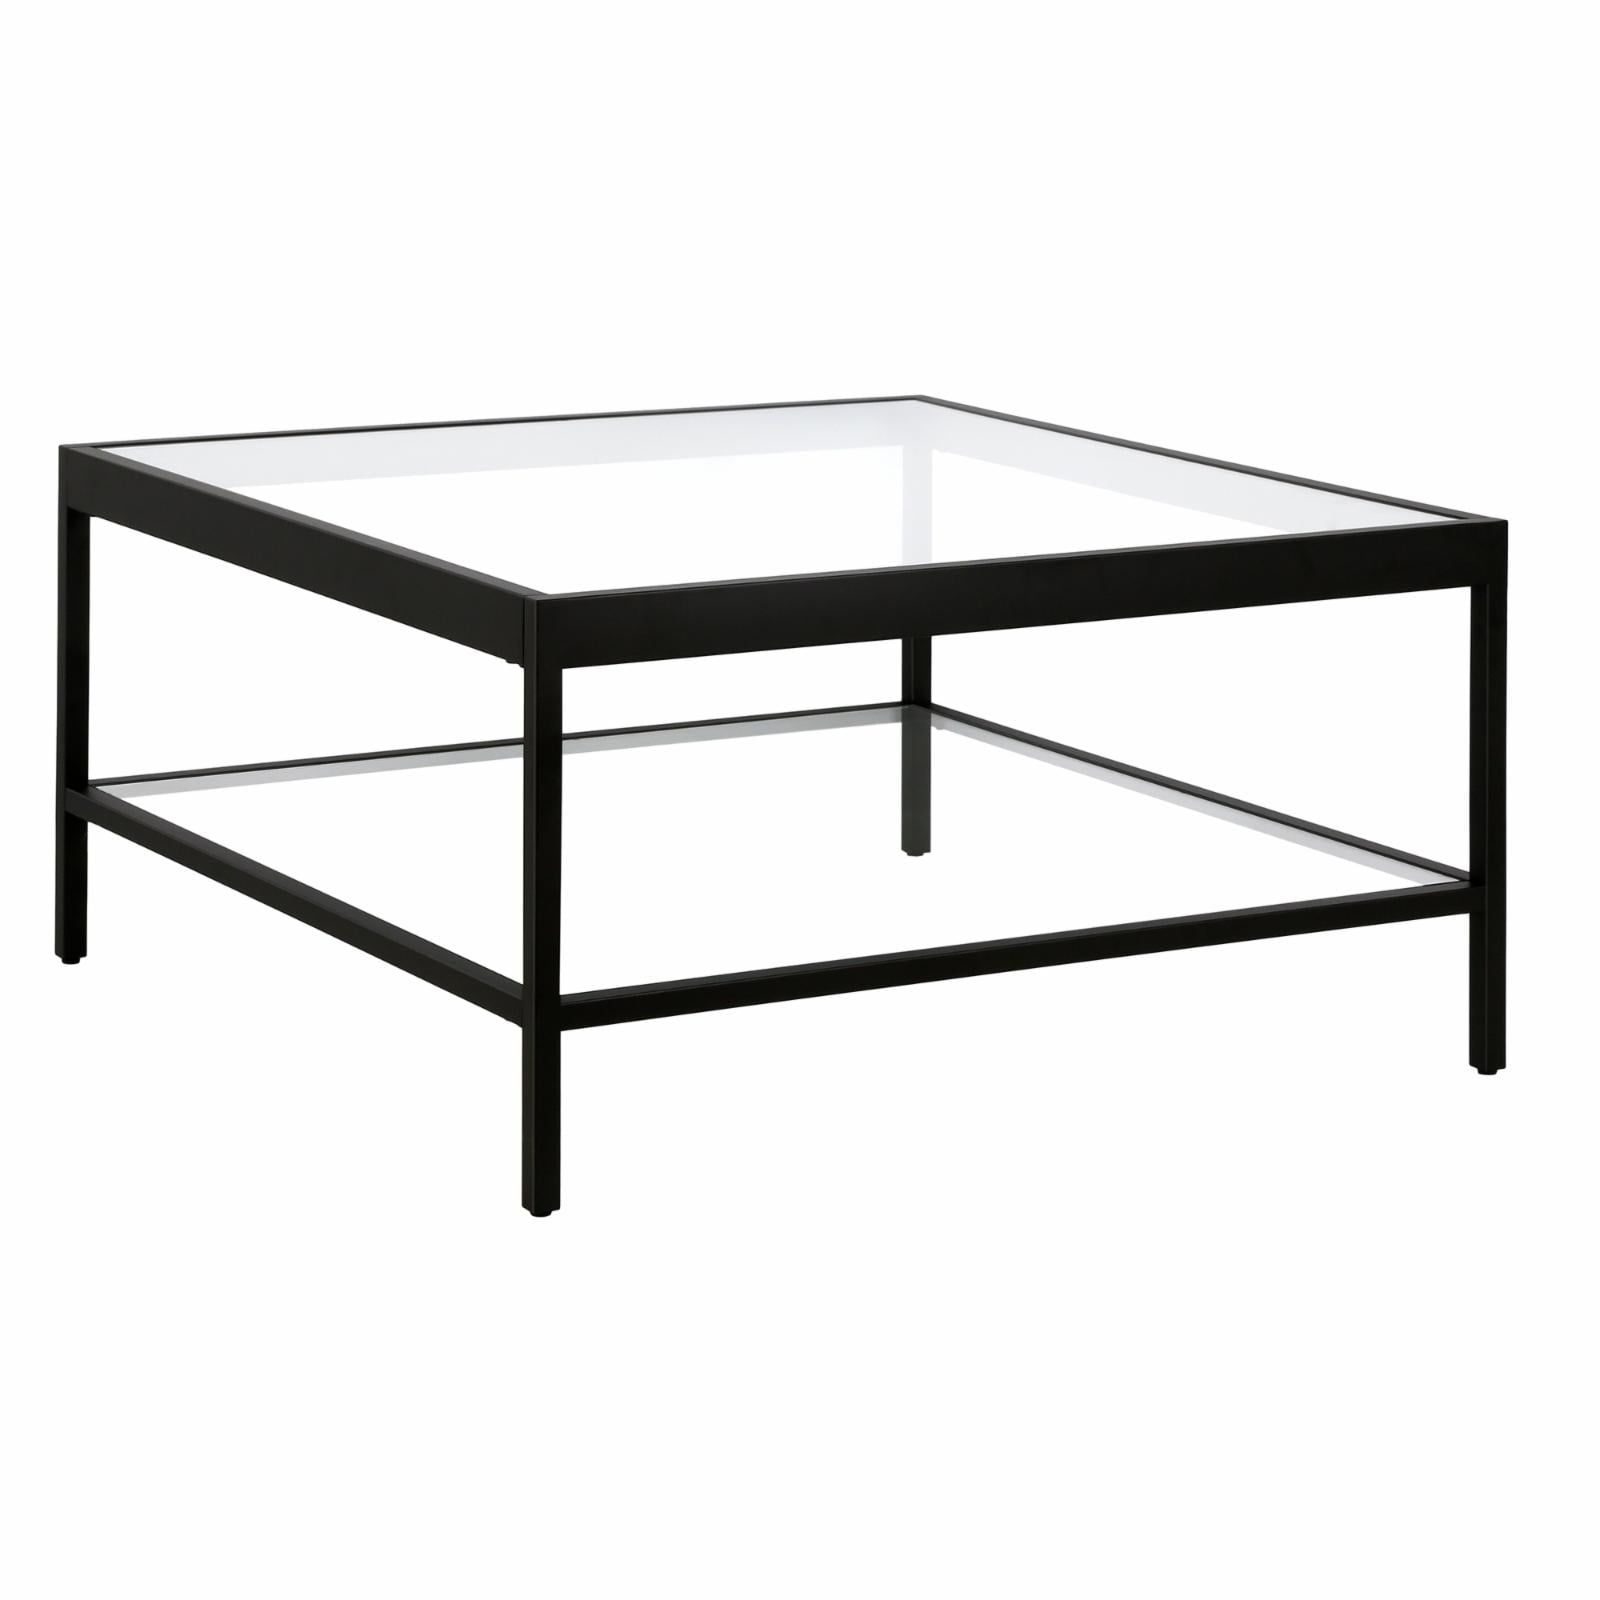 Addison&Lane Alexis Square Coffee Table – Walmart Throughout Addison&amp;Lane Calix Square Tables (View 7 of 15)